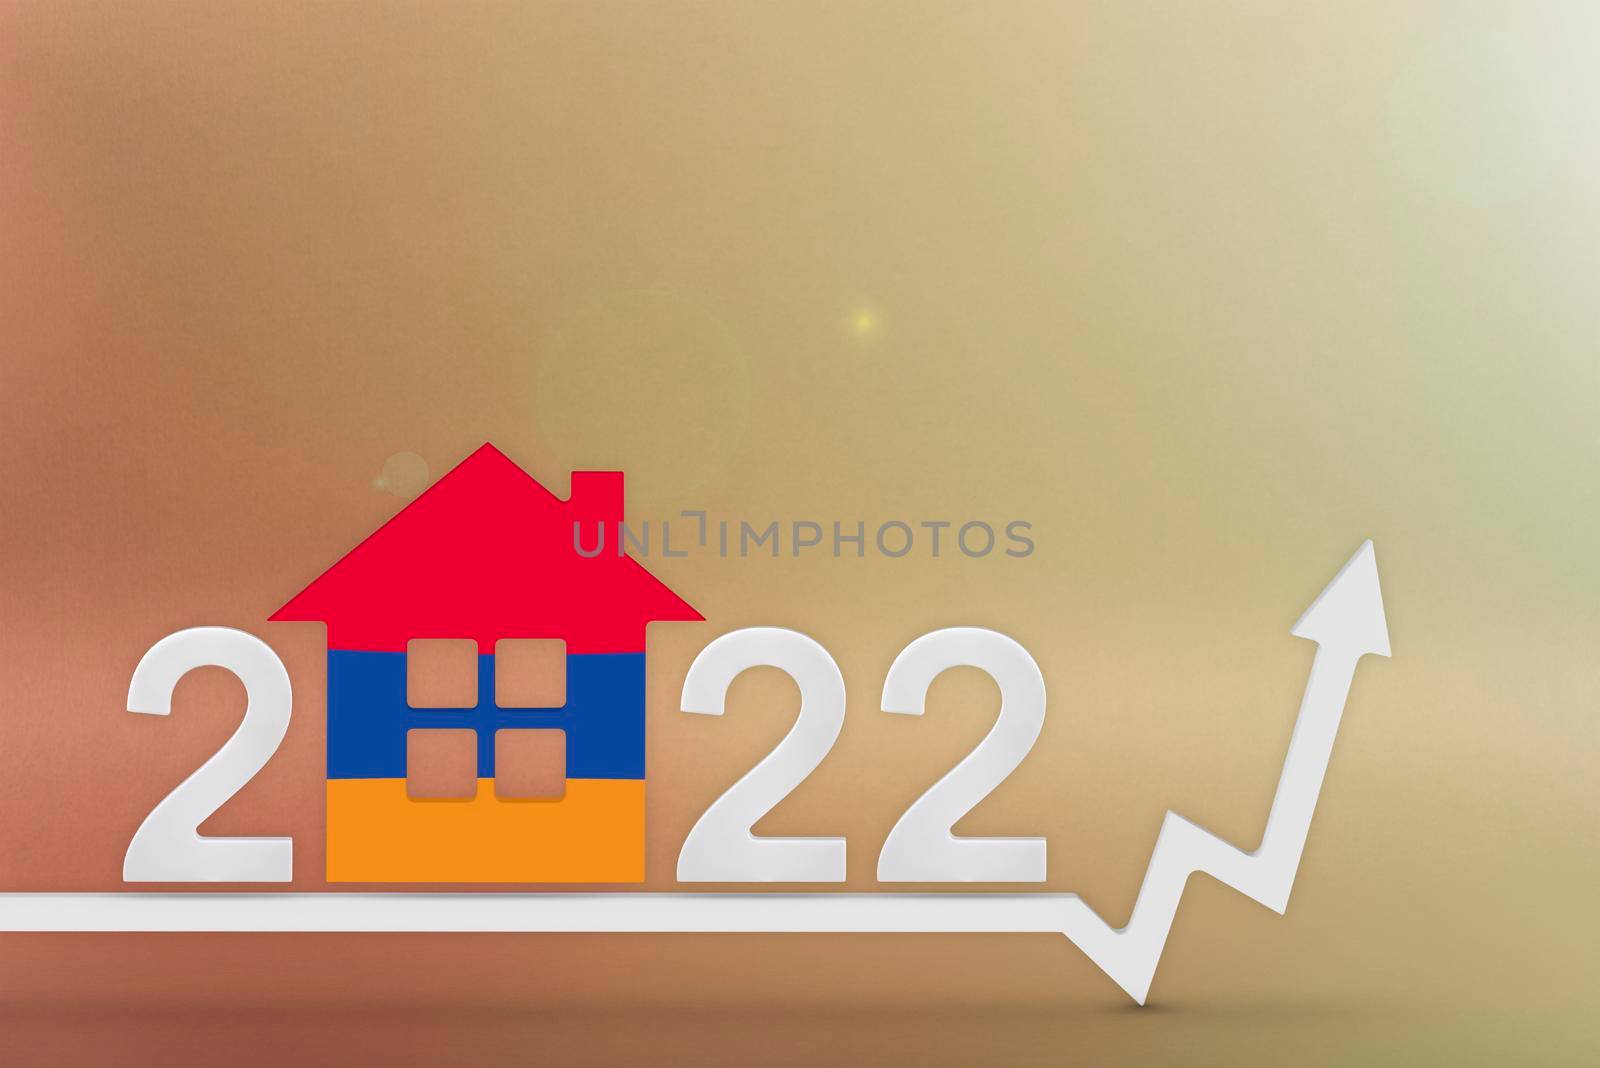 The cost of real estate in Armenia in 2022. Rising cost of construction, insurance, rent in Armenia. House model painted in flag colors, up arrow on yellow background by SERSOL